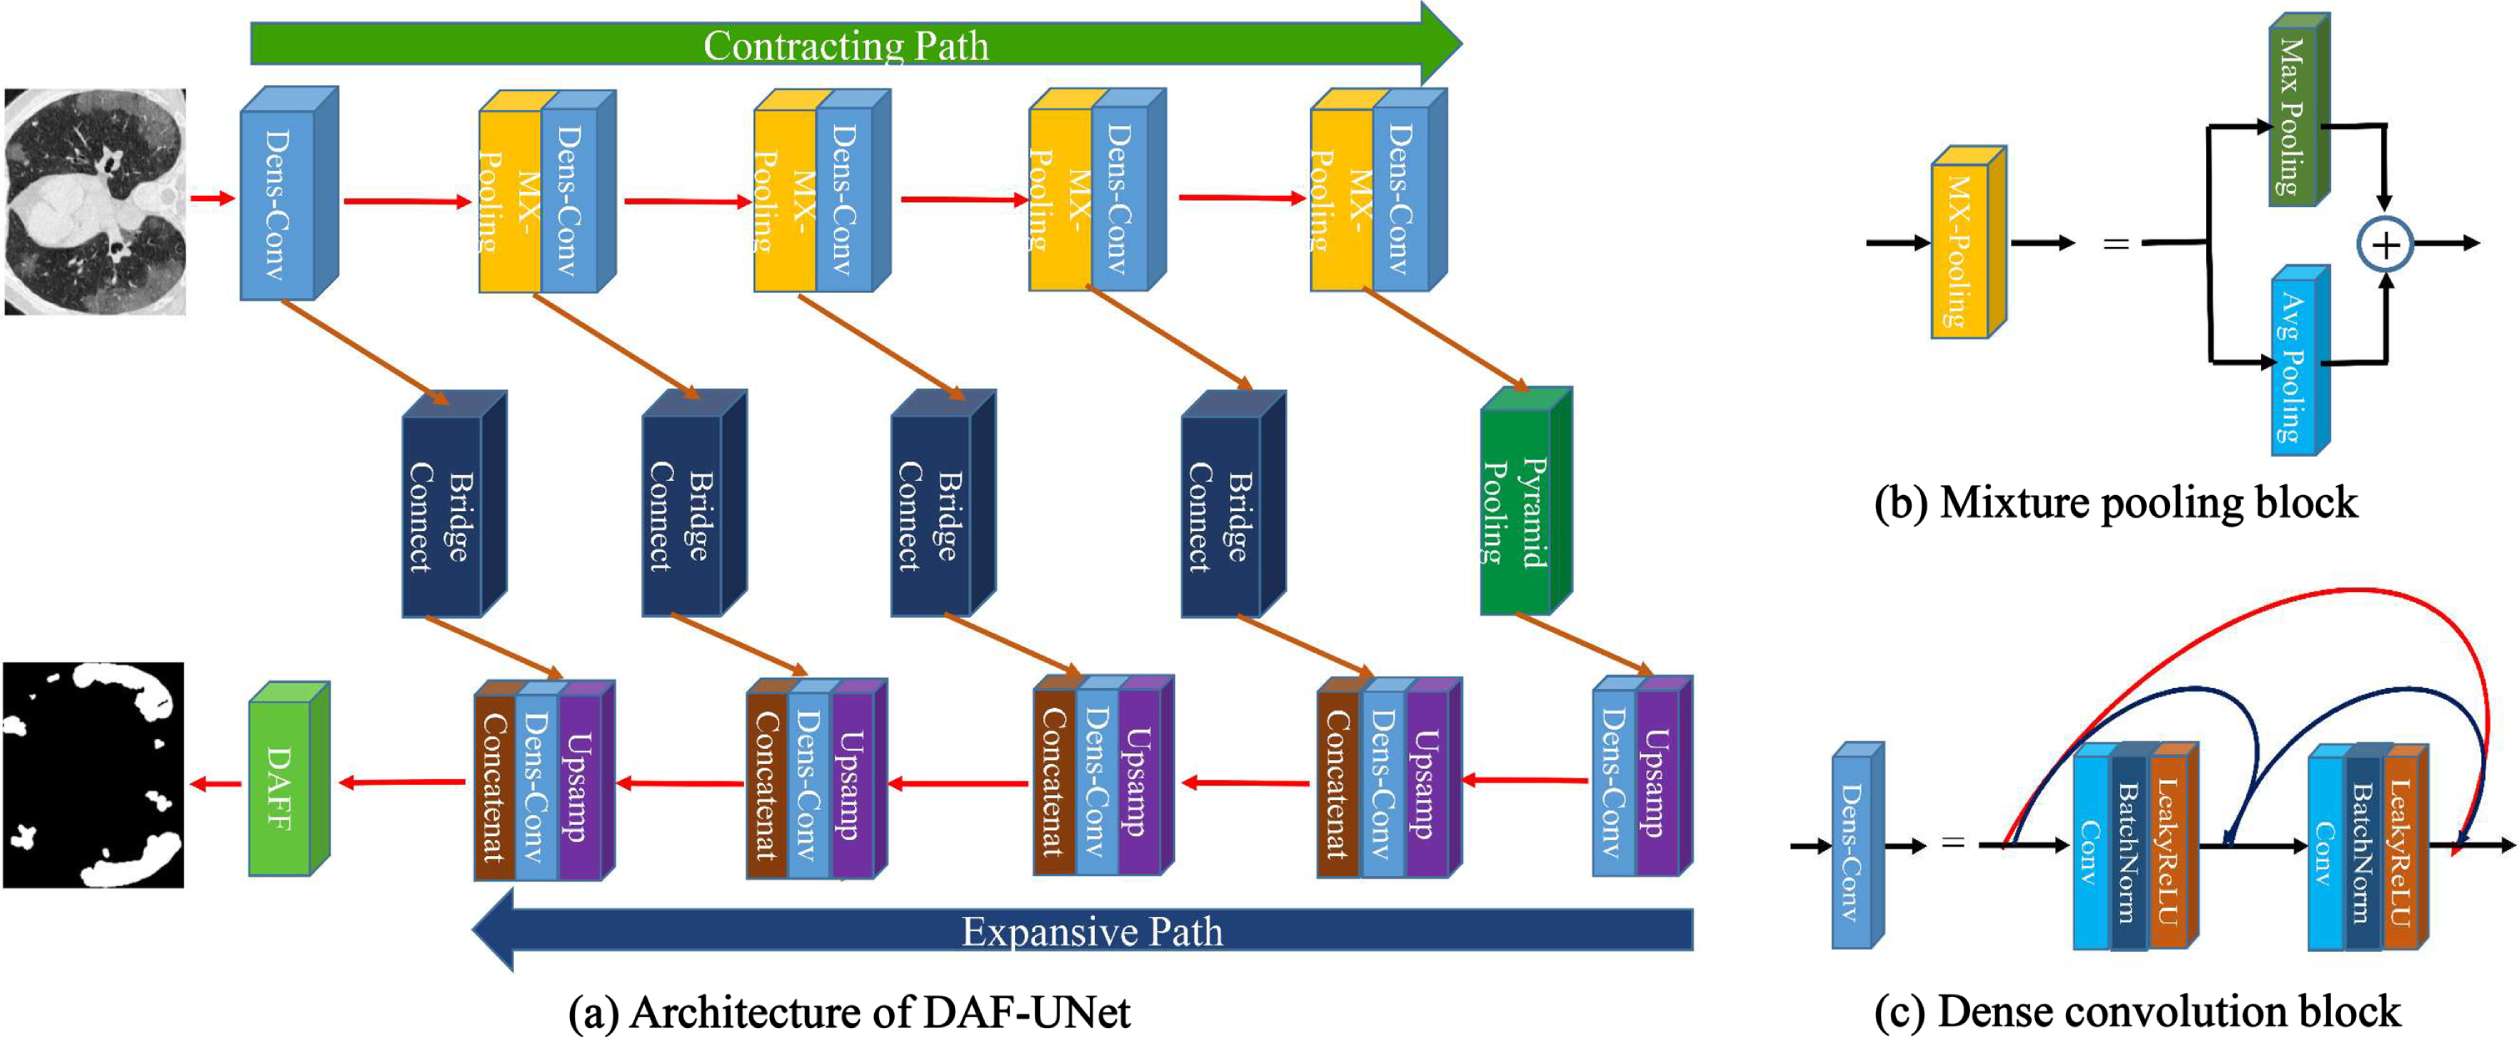 Architecture of the DAF-UNet. It contains (a) UNet backbone, (b) Mixture pooling (MX-pooling), and (c) Dense convolution block.